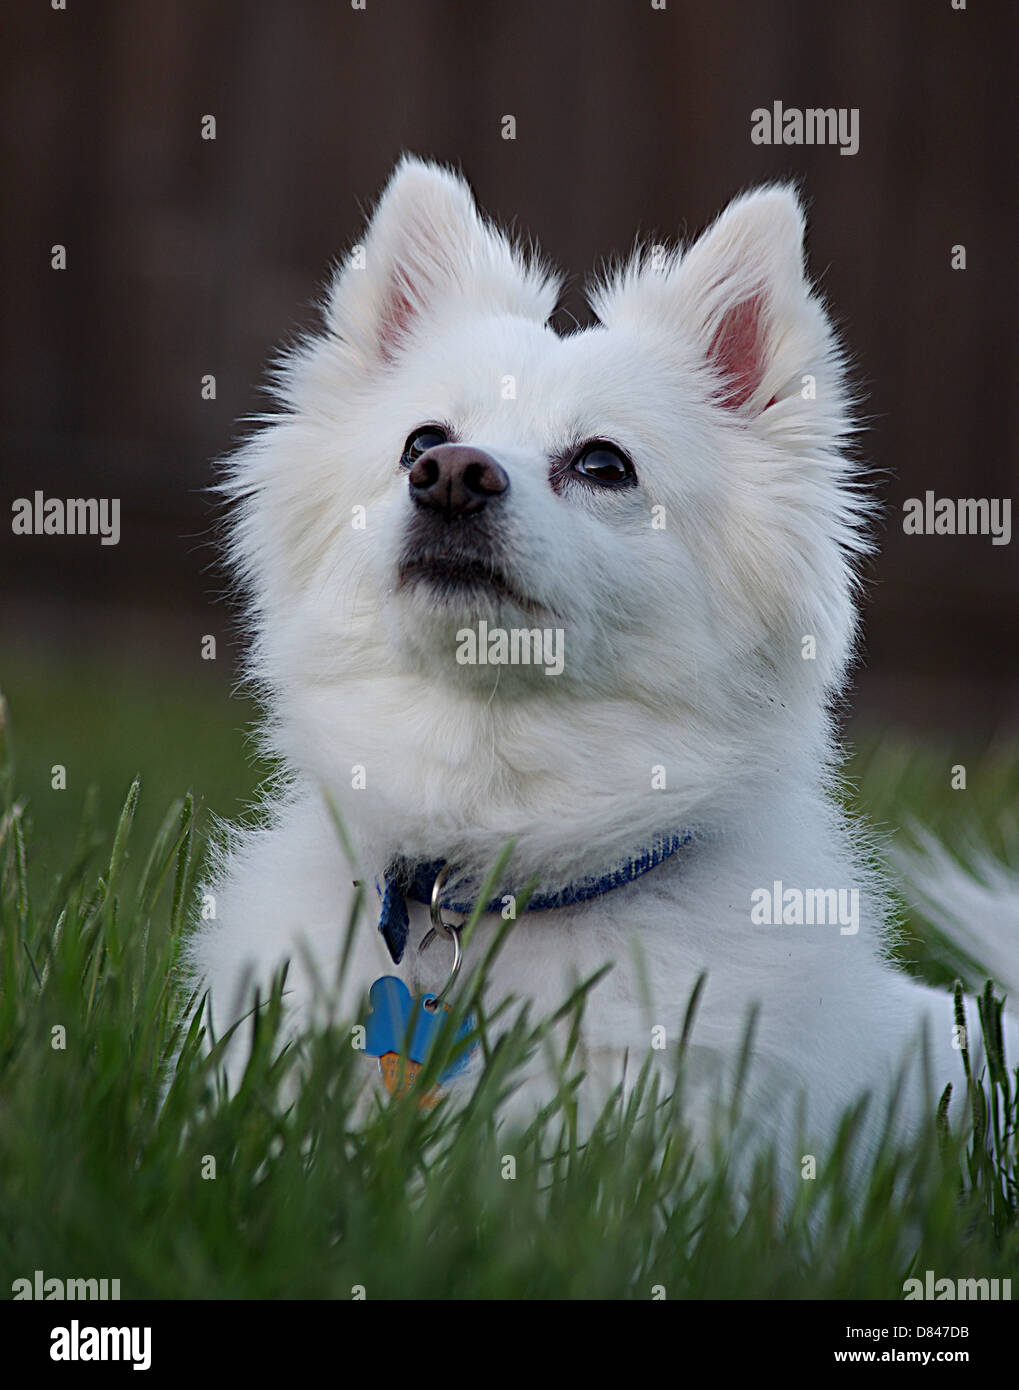 American eskimo dog looking up Banque D'Images